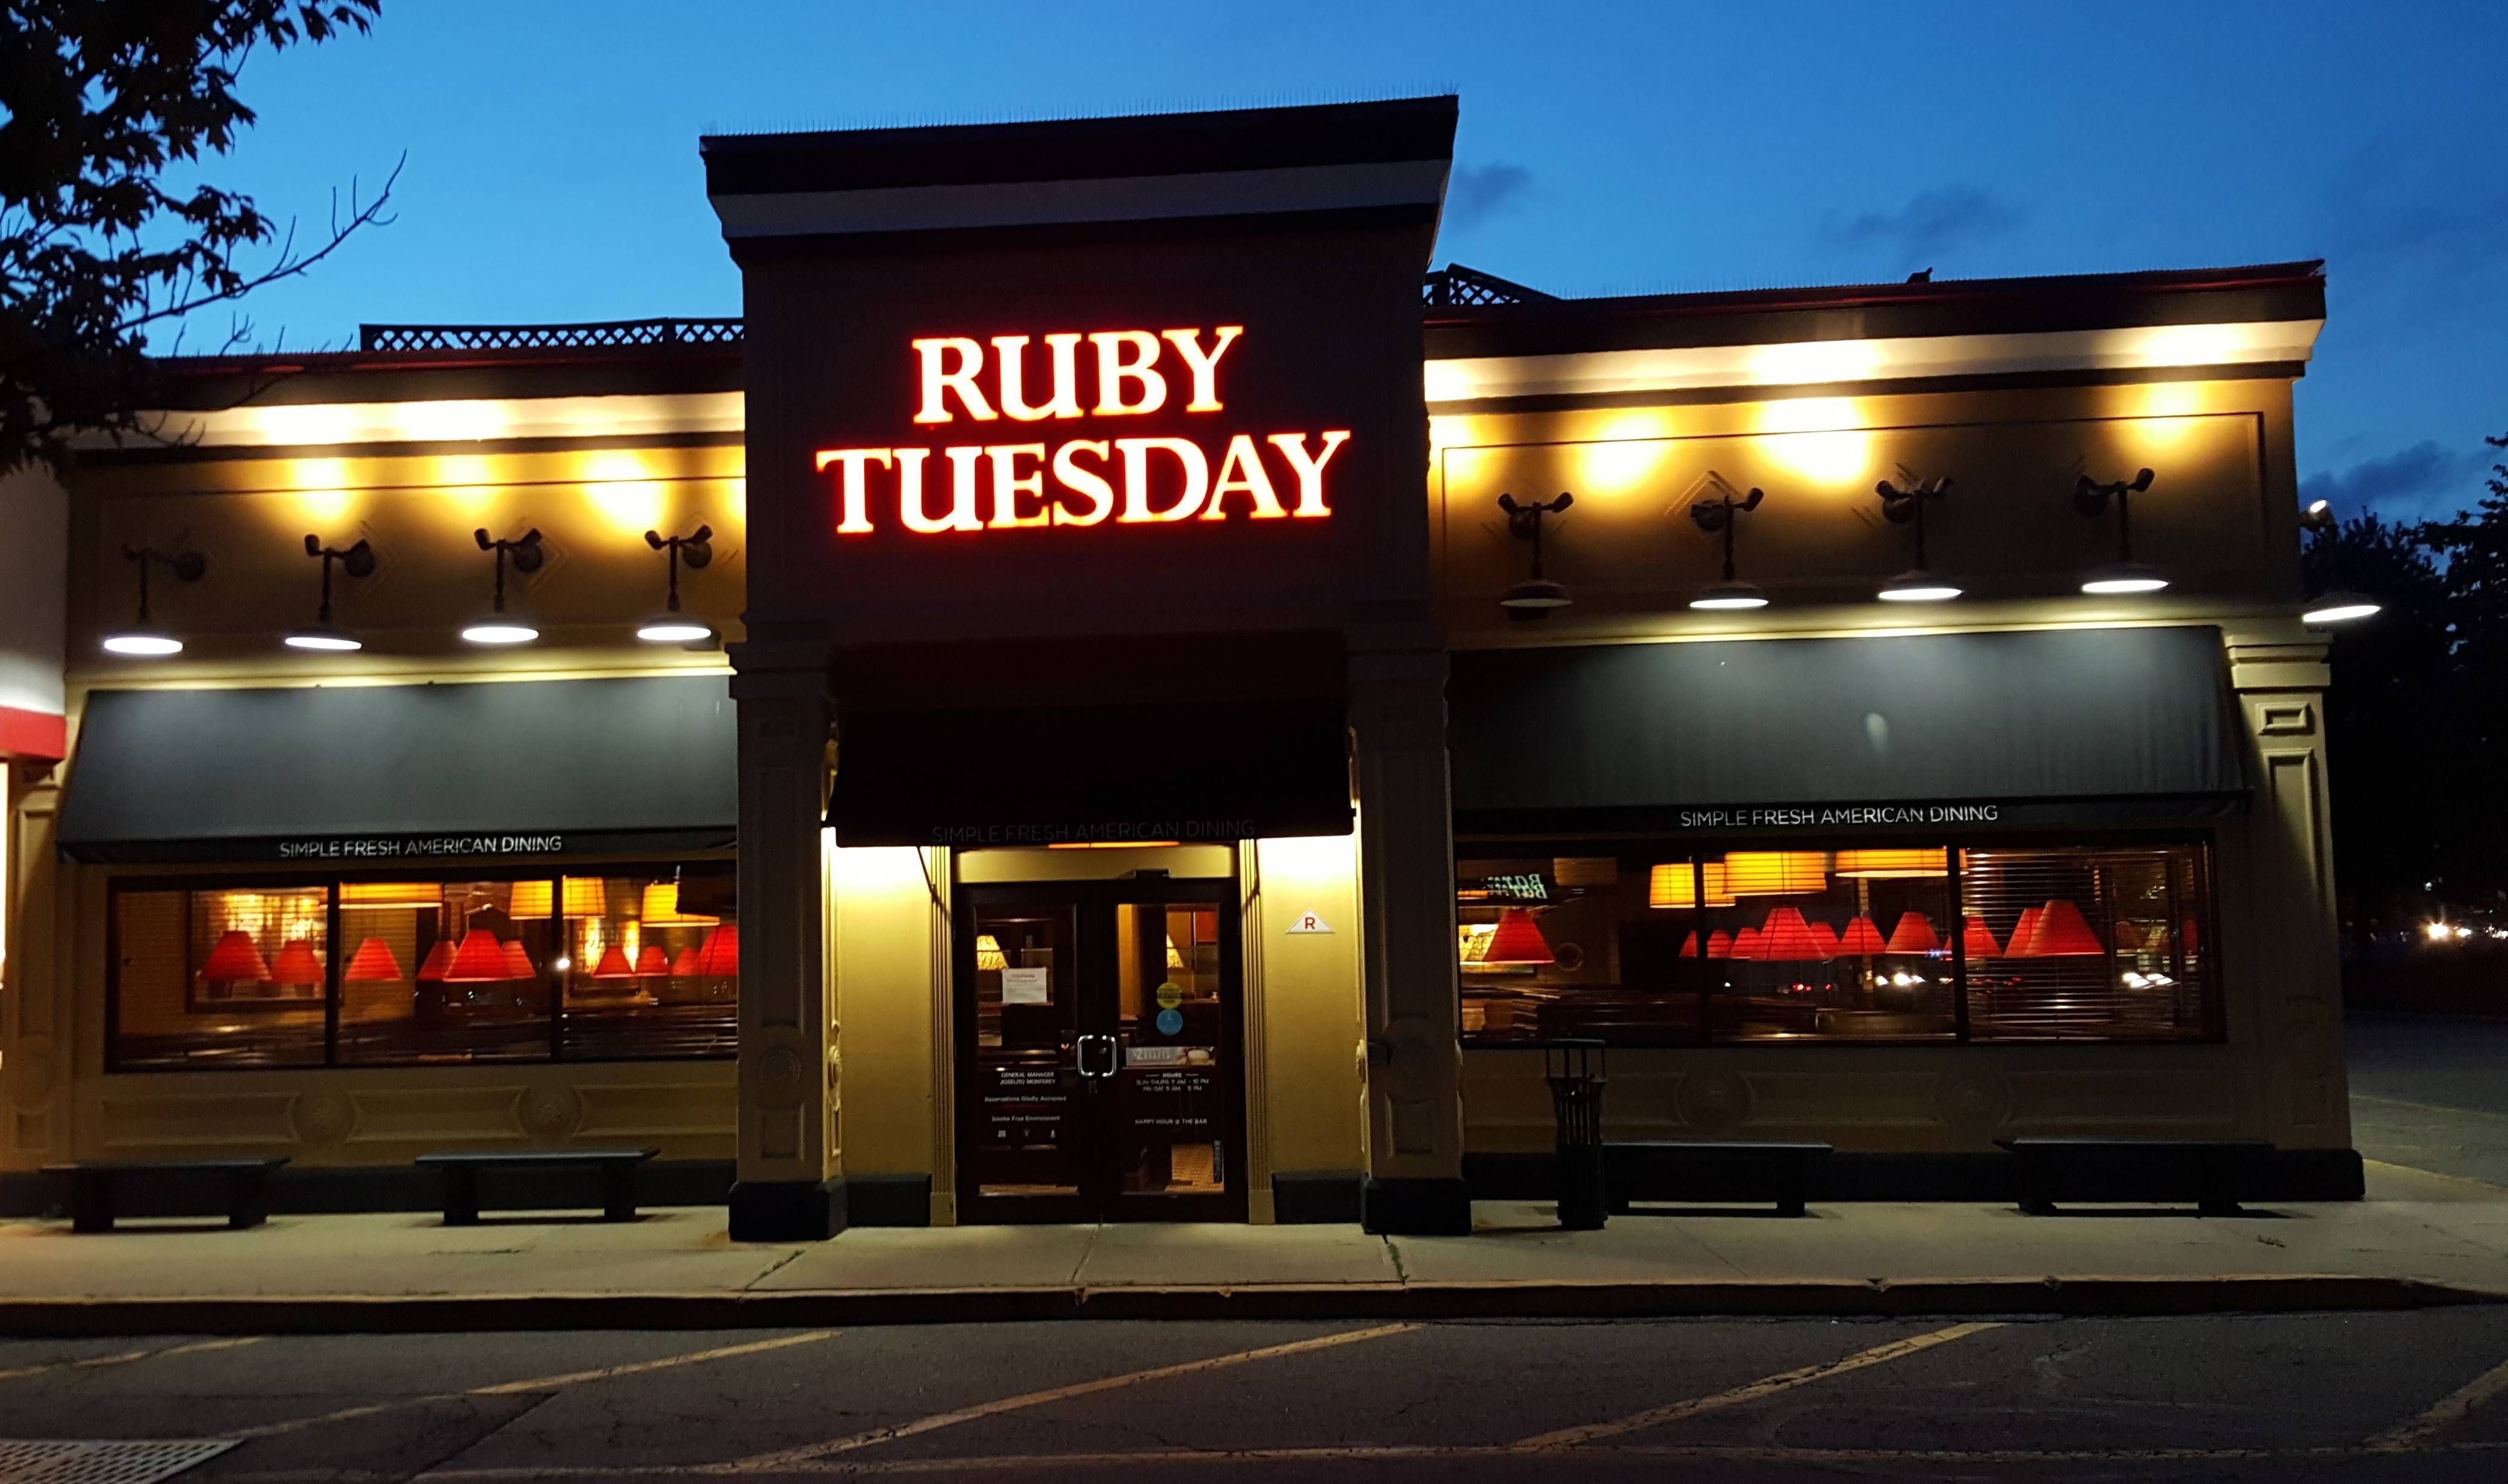 Restaurant Ruby Tuesday Sues Band Of Same Name For $2 Million - CelebrityAc...